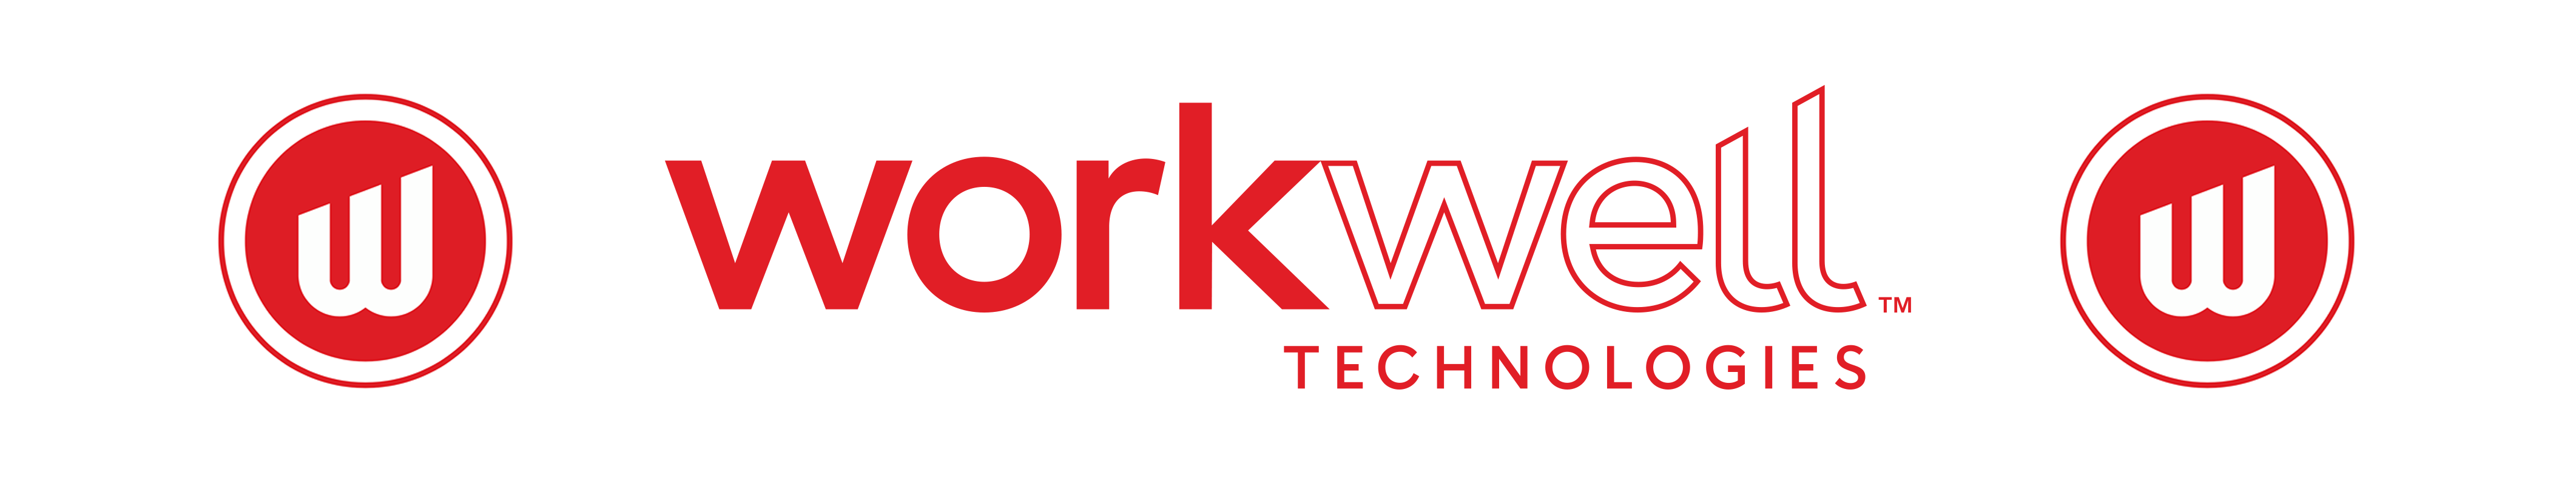 Workwell technology